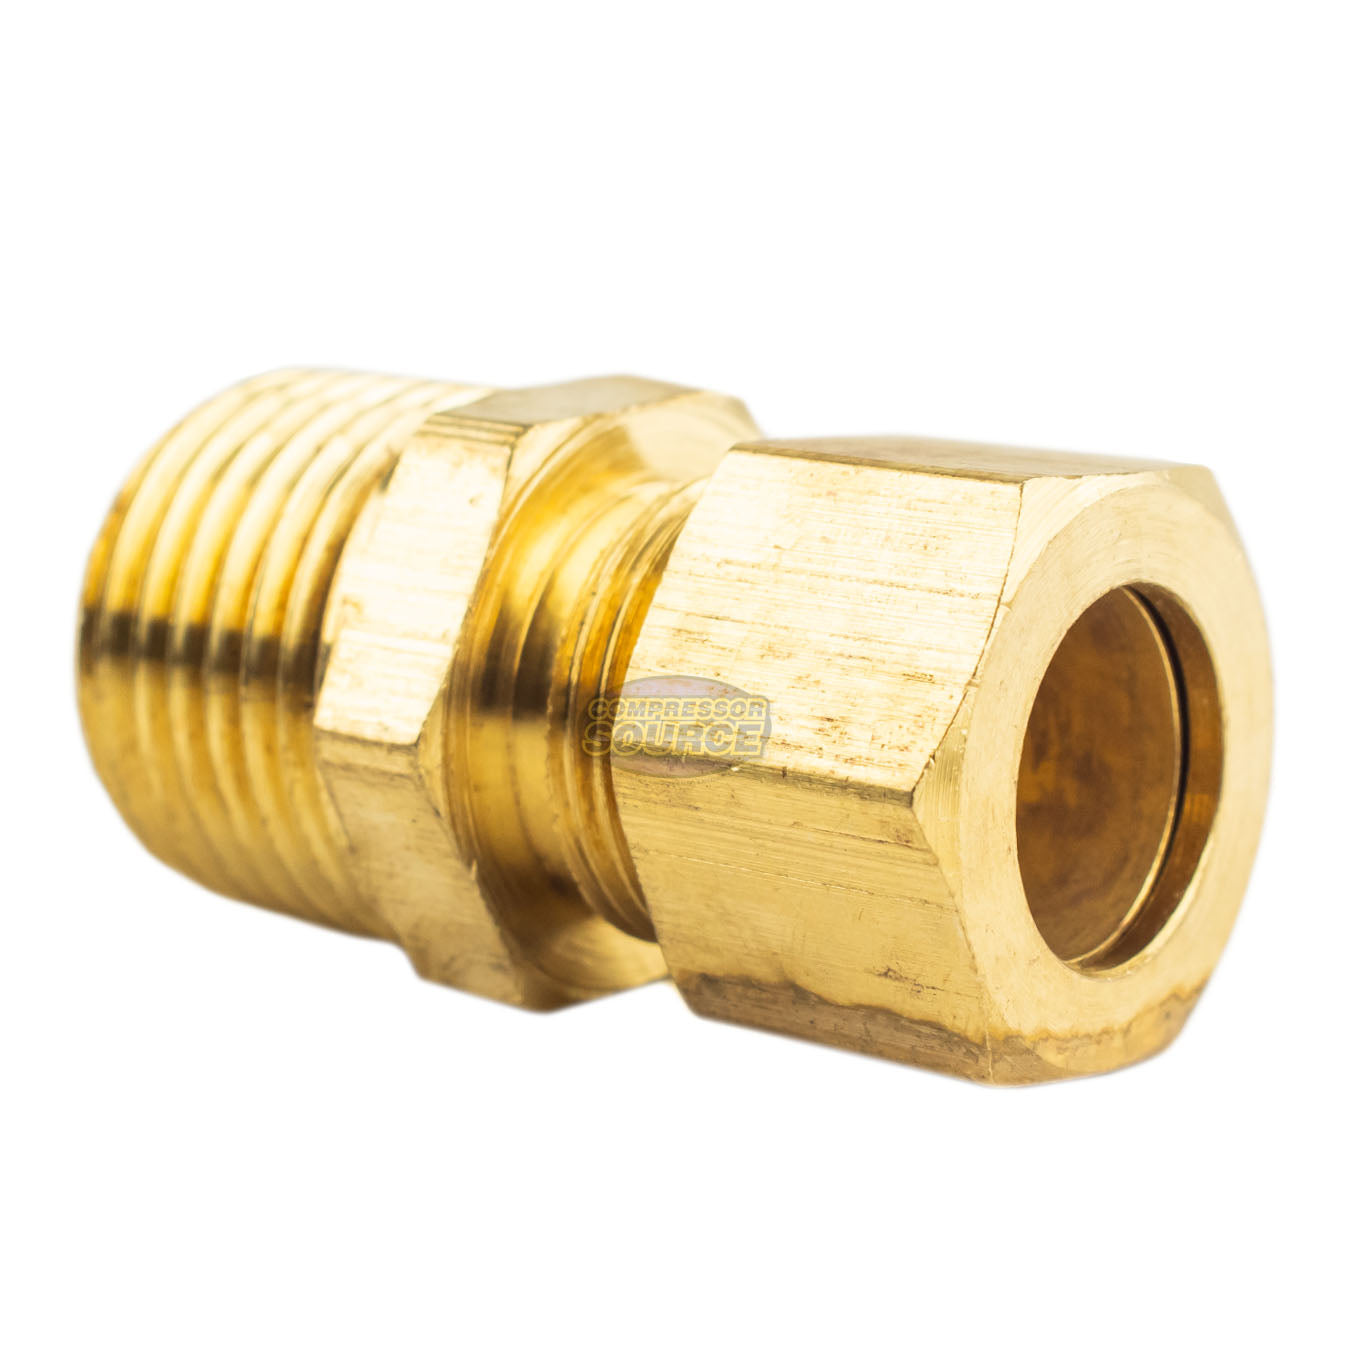 10 Pack 1/2 x 1/2" Male NPT Connector Brass Compression Fitting for 1/2" OD Tube